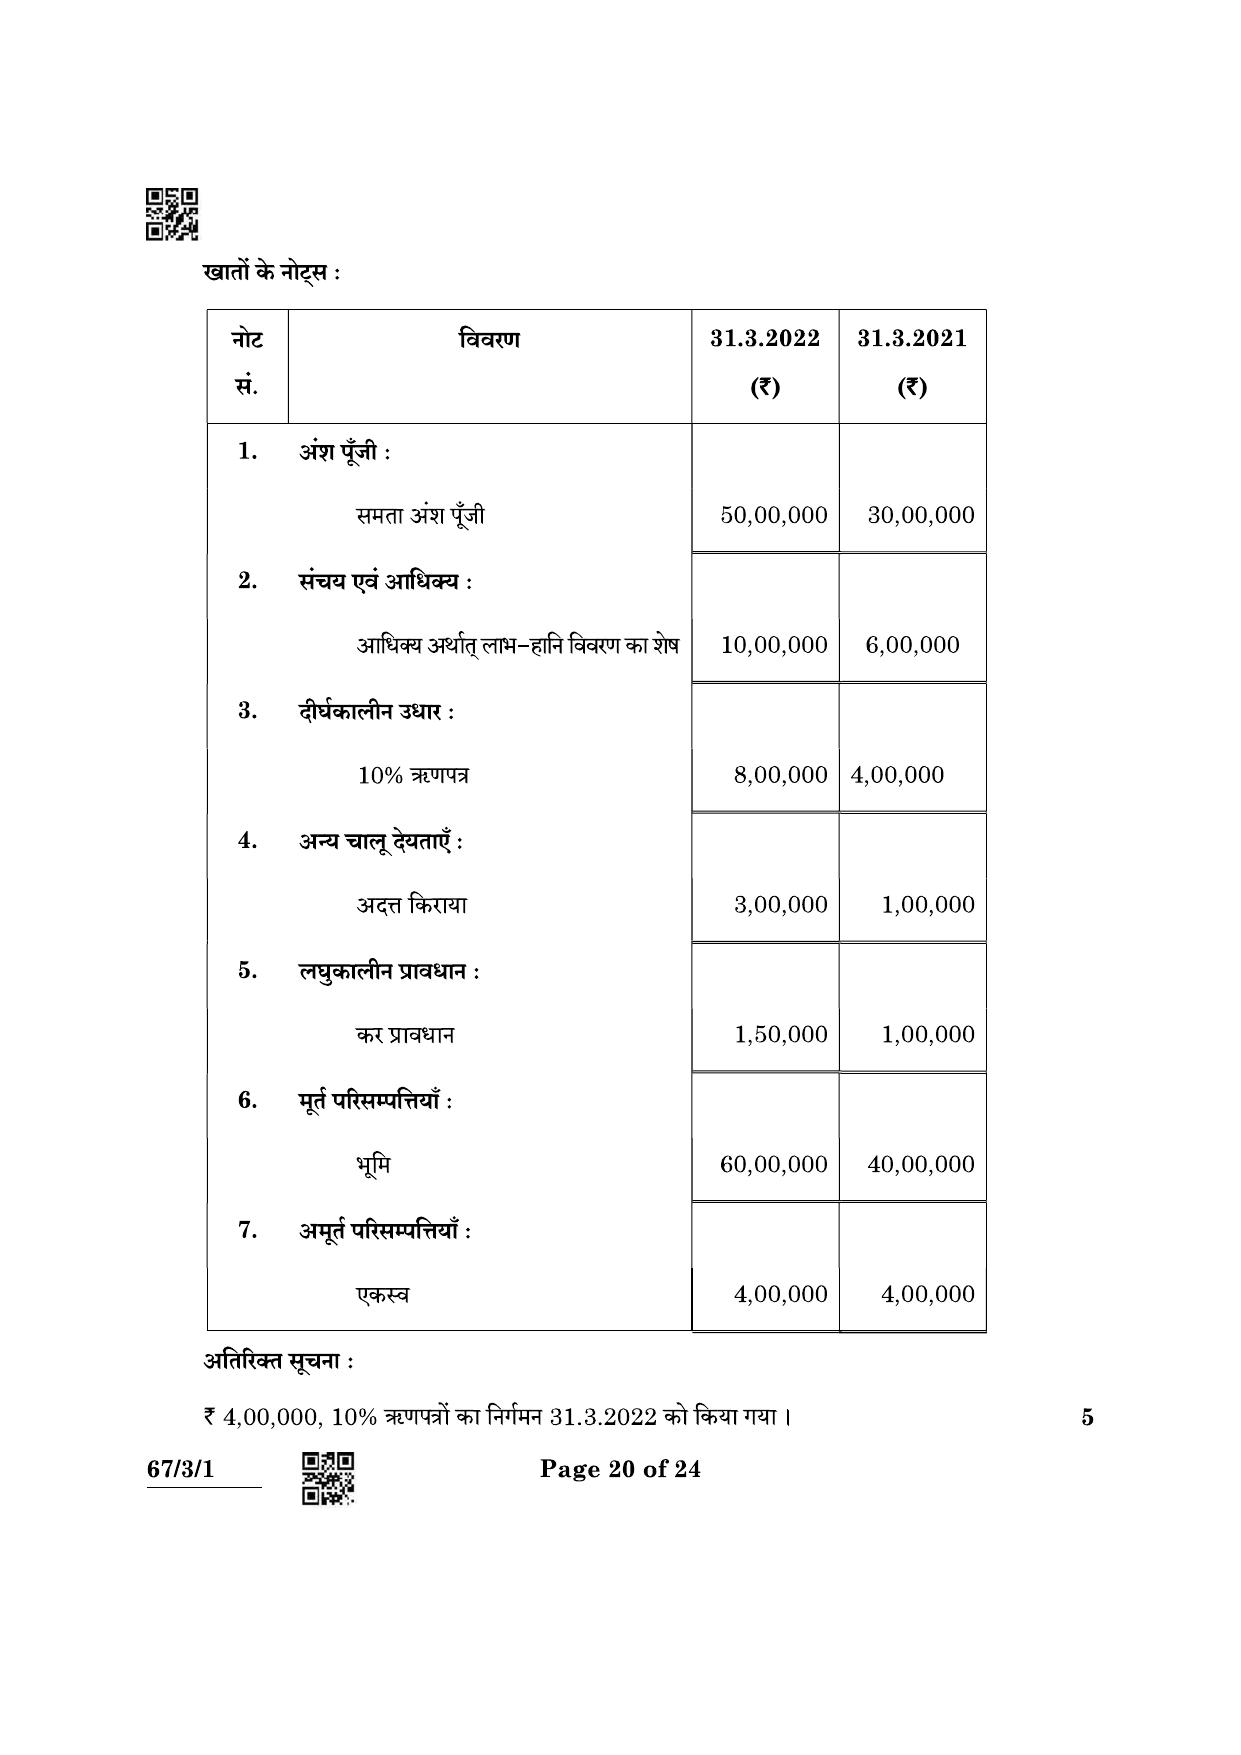 CBSE Class 12 67-3-1 Accountancy 2022 Question Paper - Page 20